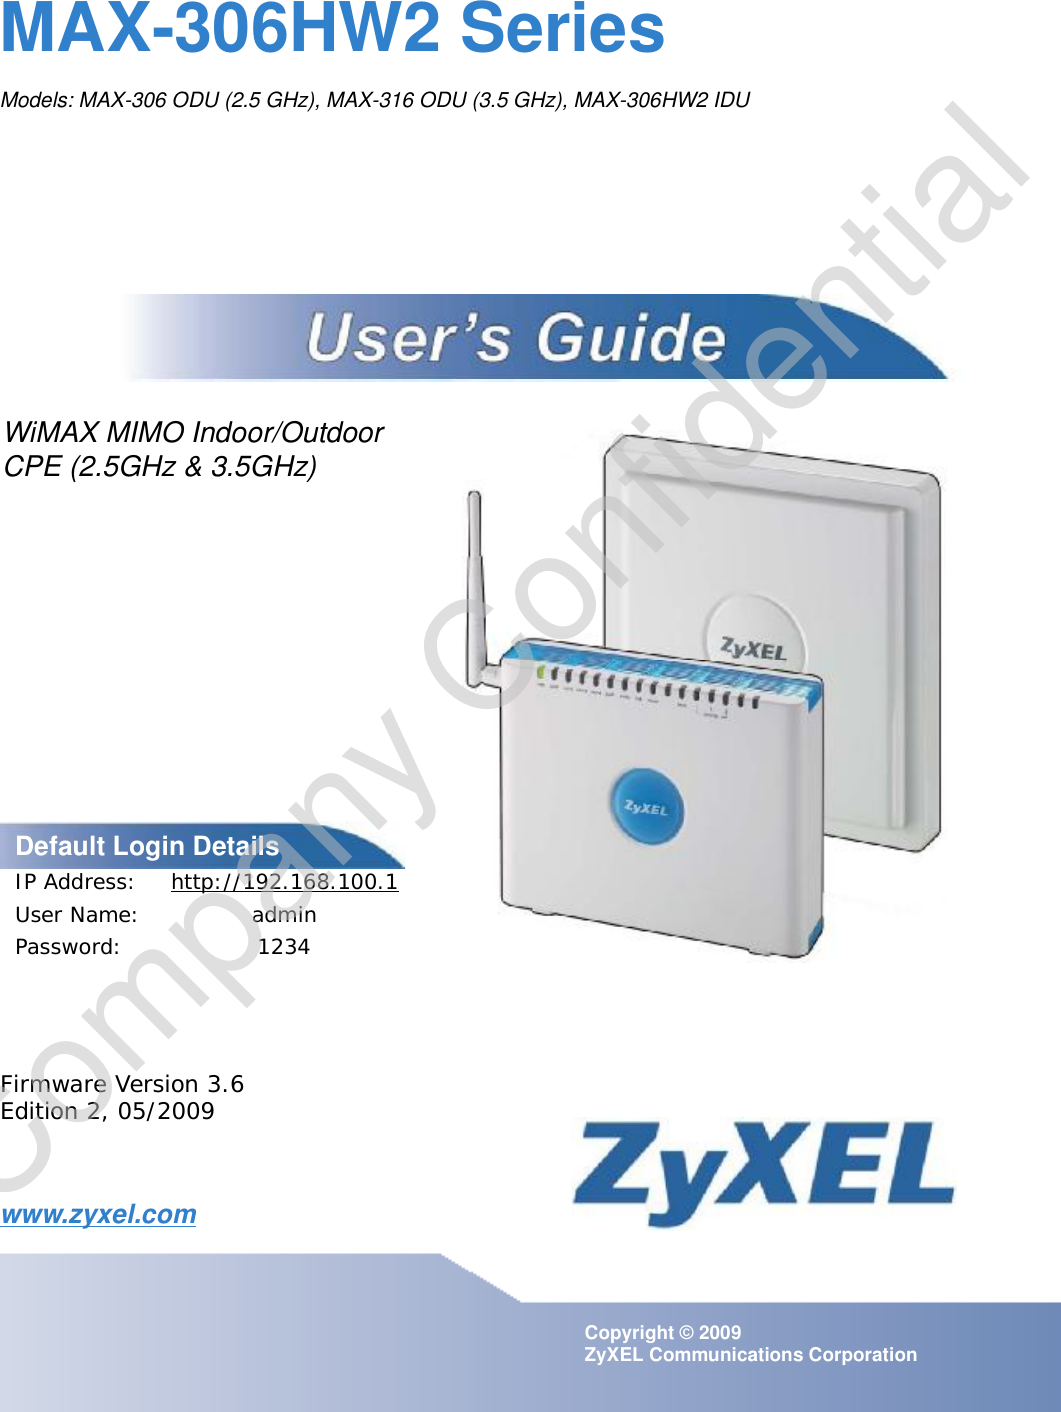 www.zyxel.comwww.zyxel.comMAX-306HW2 SeriesModels: MAX-306 ODU (2.5 GHz), MAX-316 ODU (3.5 GHz), MAX-306HW2 IDU Copyright © 2009ZyXEL Communications CorporationFirmware Version 3.6Edition 2, 05/2009Default Login DetailsIP Address: http://192.168.100.1User Name:adminPassword:1234WiMAX MIMO Indoor/OutdoorCPE (2.5GHz &amp; 3.5GHz)Company Confidential